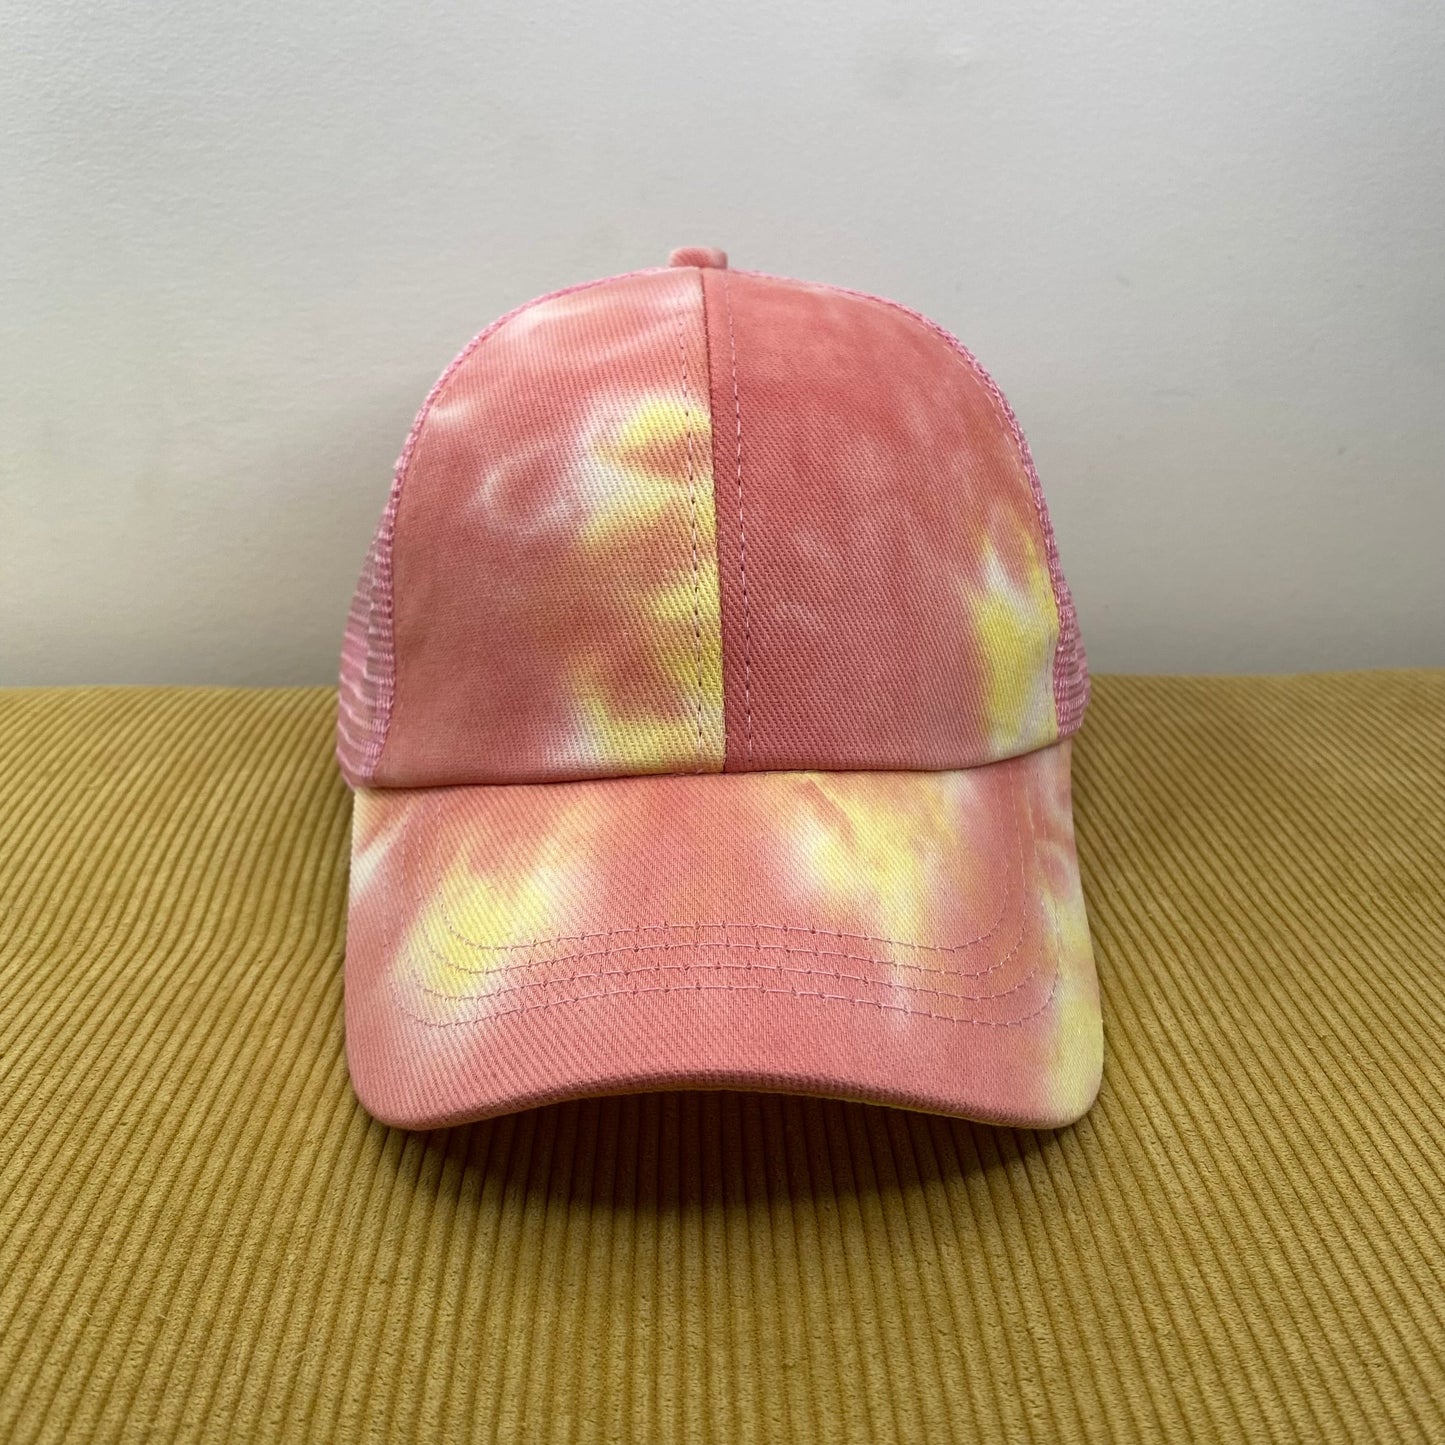 Hat - Tie Dye - Coral Pink Yellow